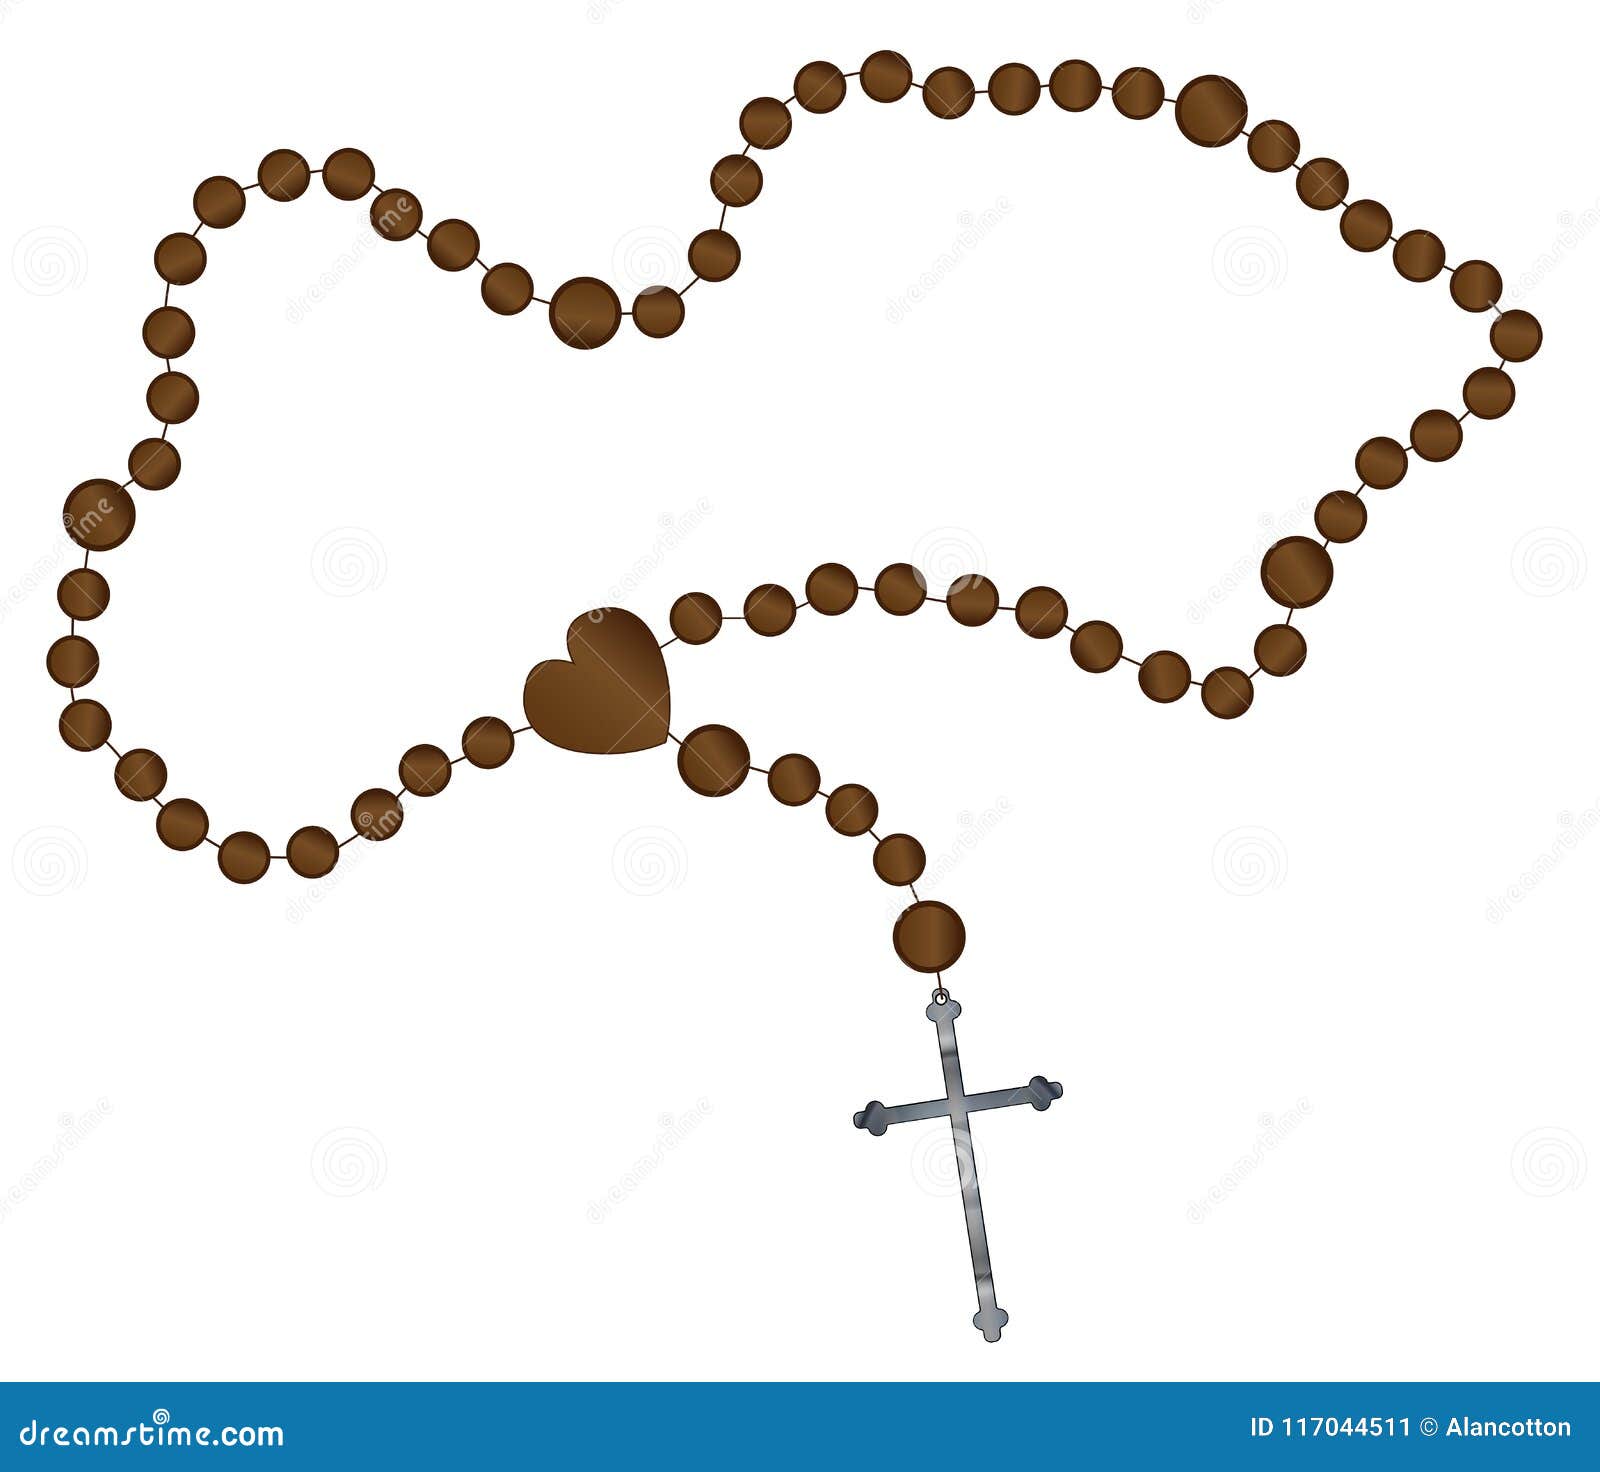 The Rosary Beads on white stock vector. Illustration of bead - 117044511